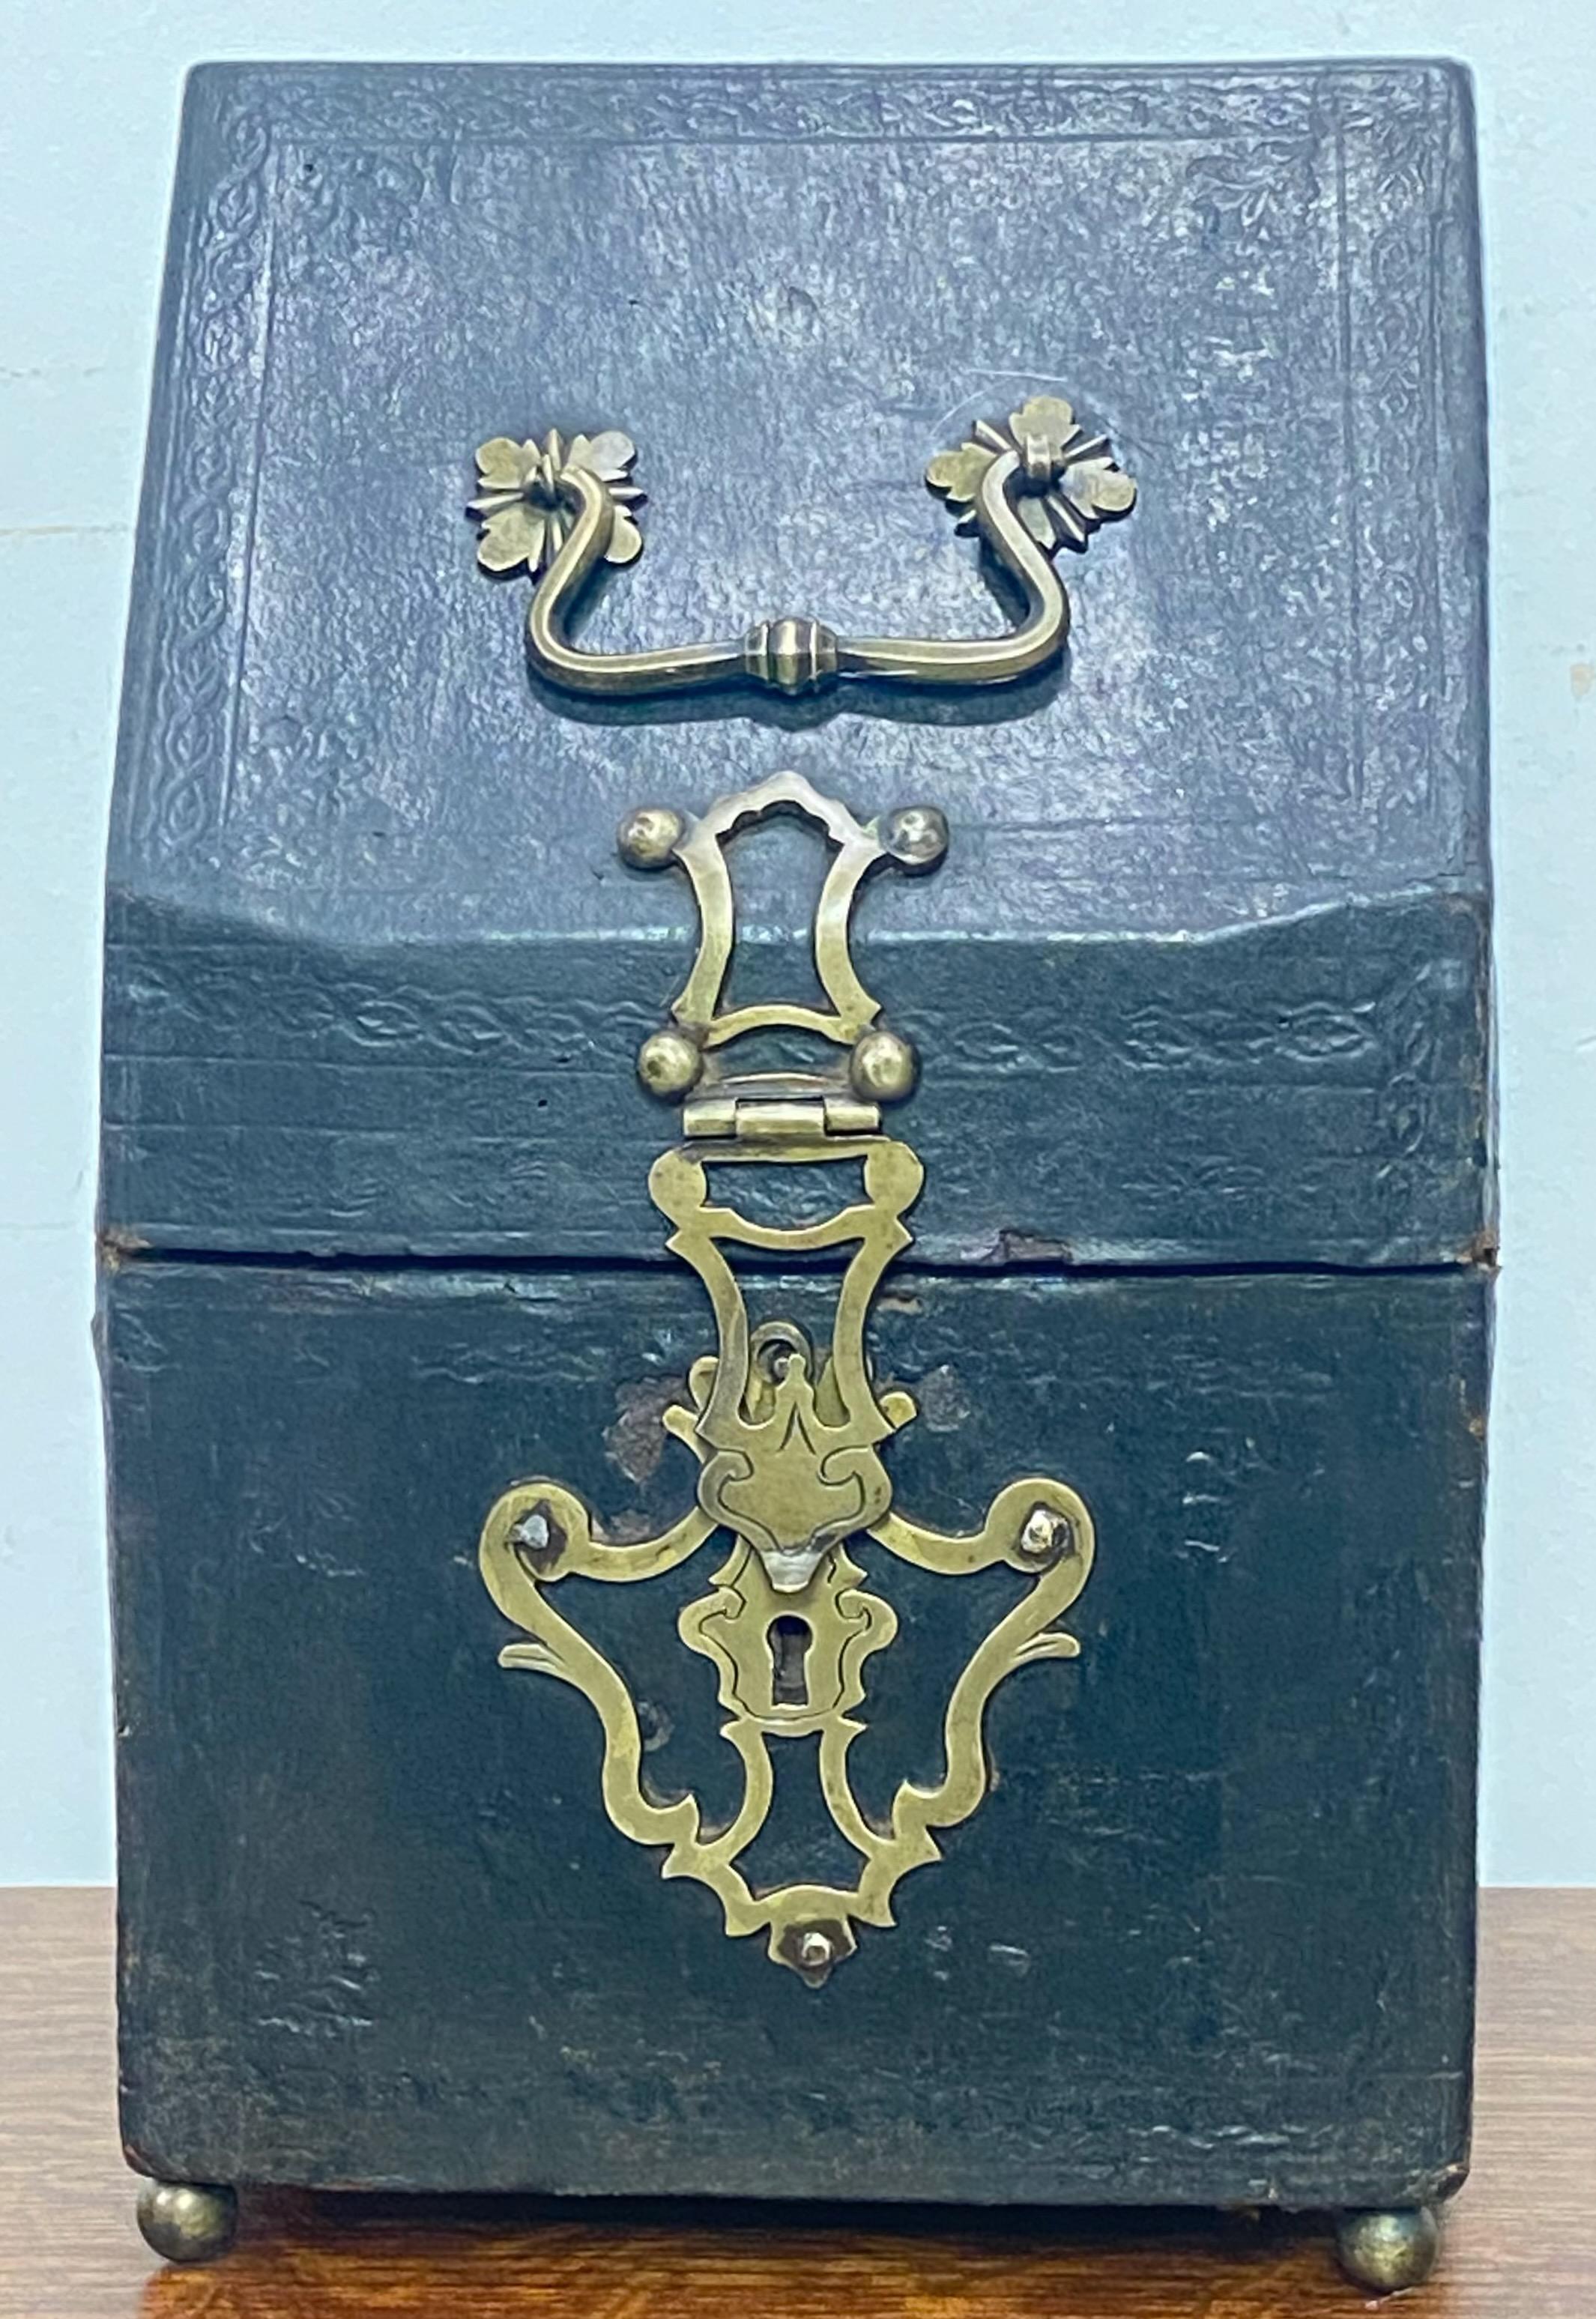 17th century leather knife box converted to a letter box with original brass hardware, sitting on brass ball feet.
Fitted interior lined with 18th century silk fabric.
In very good condition considering its age, has some minor loss to the tooled